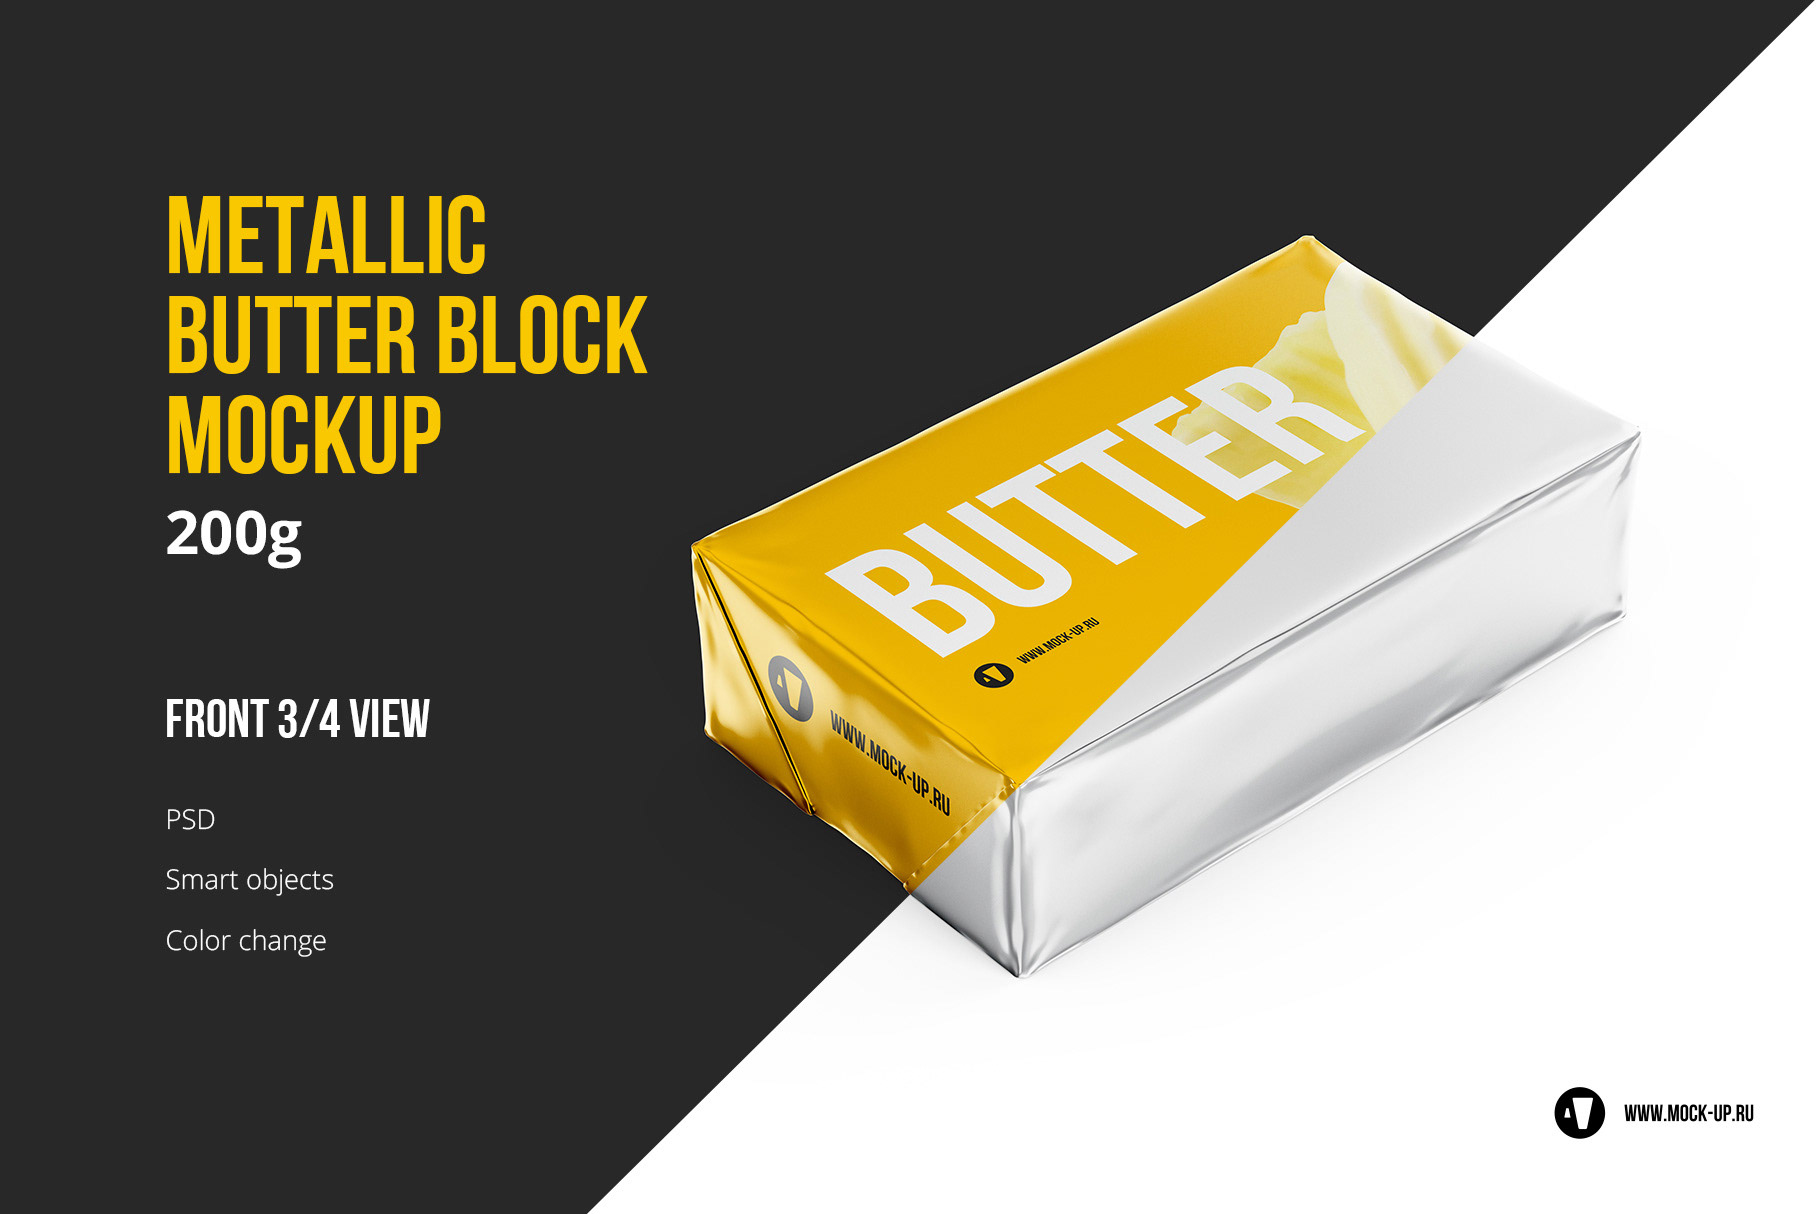 Download Exclusive Product Mockups - Butter block mockup. 200g